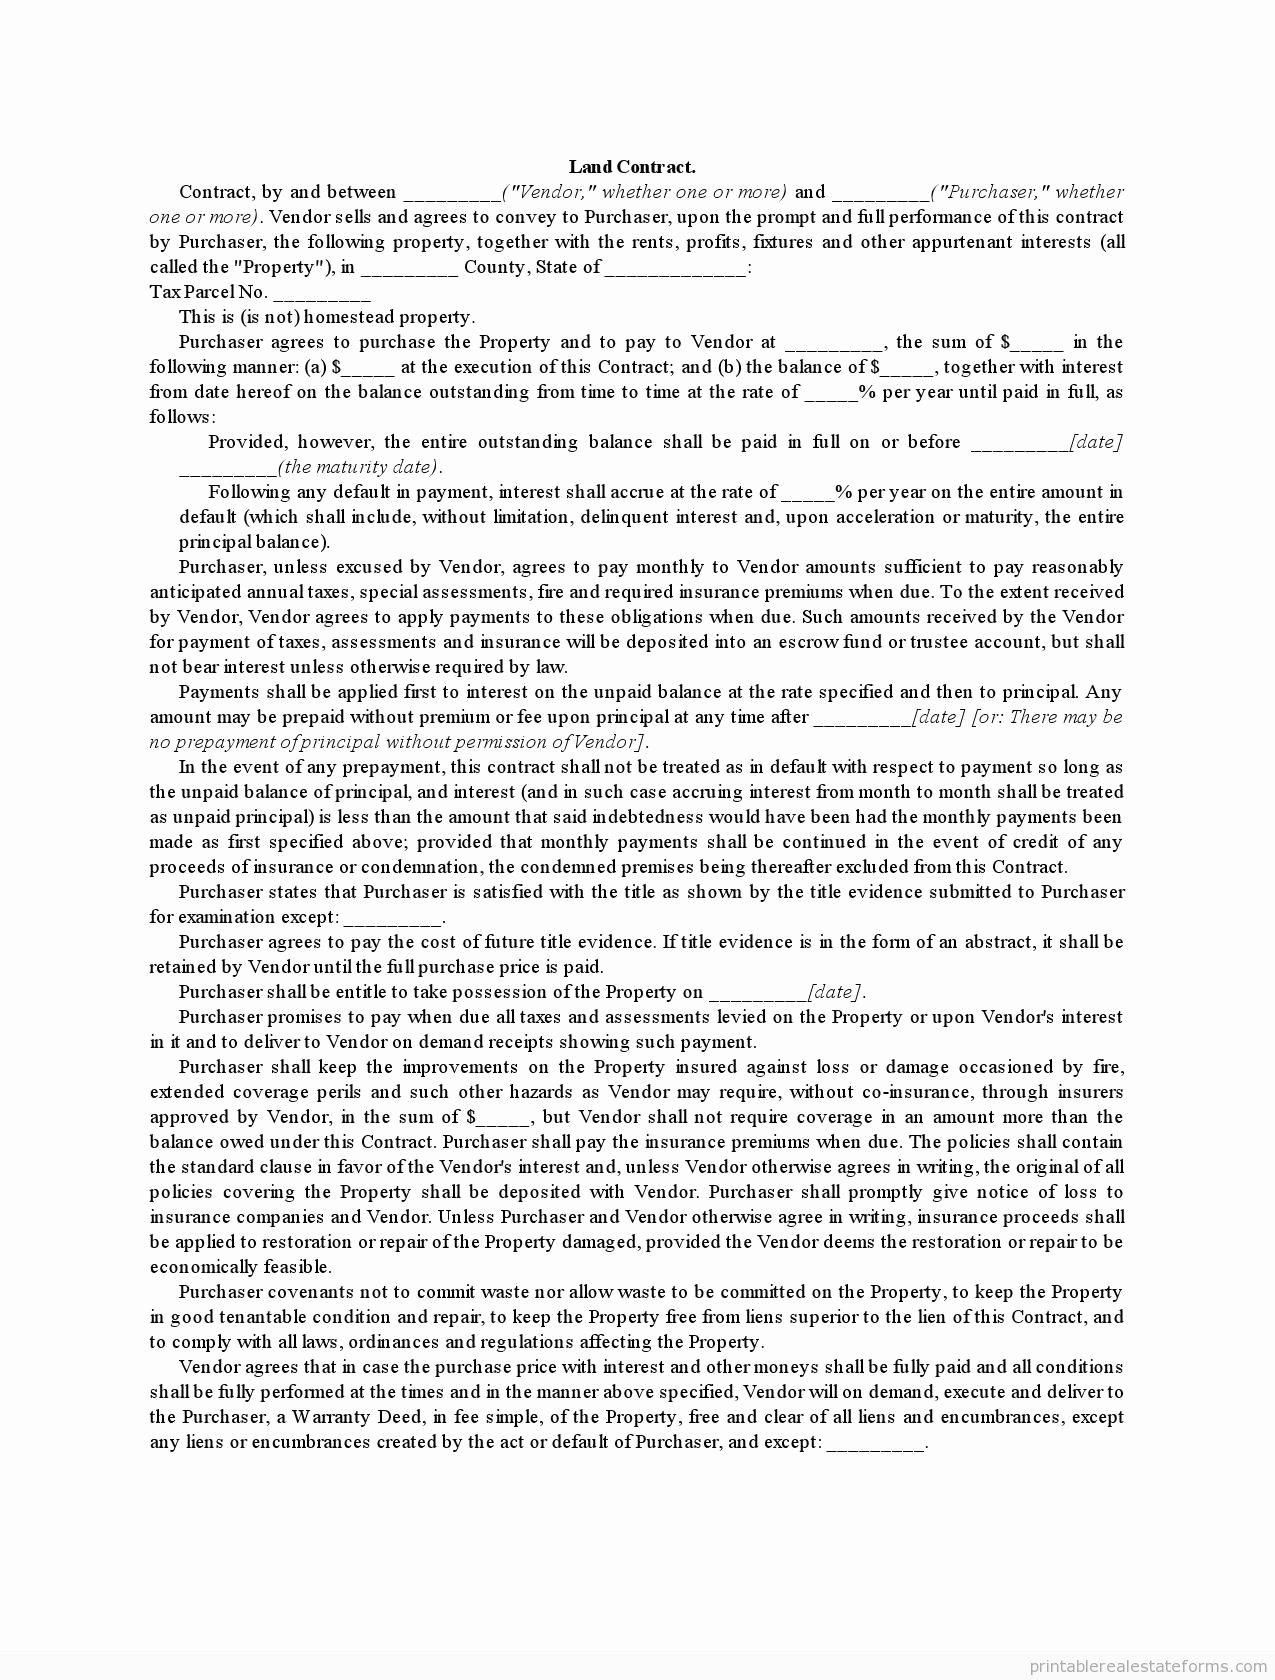 Land Purchase Agreement form Pdf Best Of Free Printable Land Contract form Pdf &amp; Word